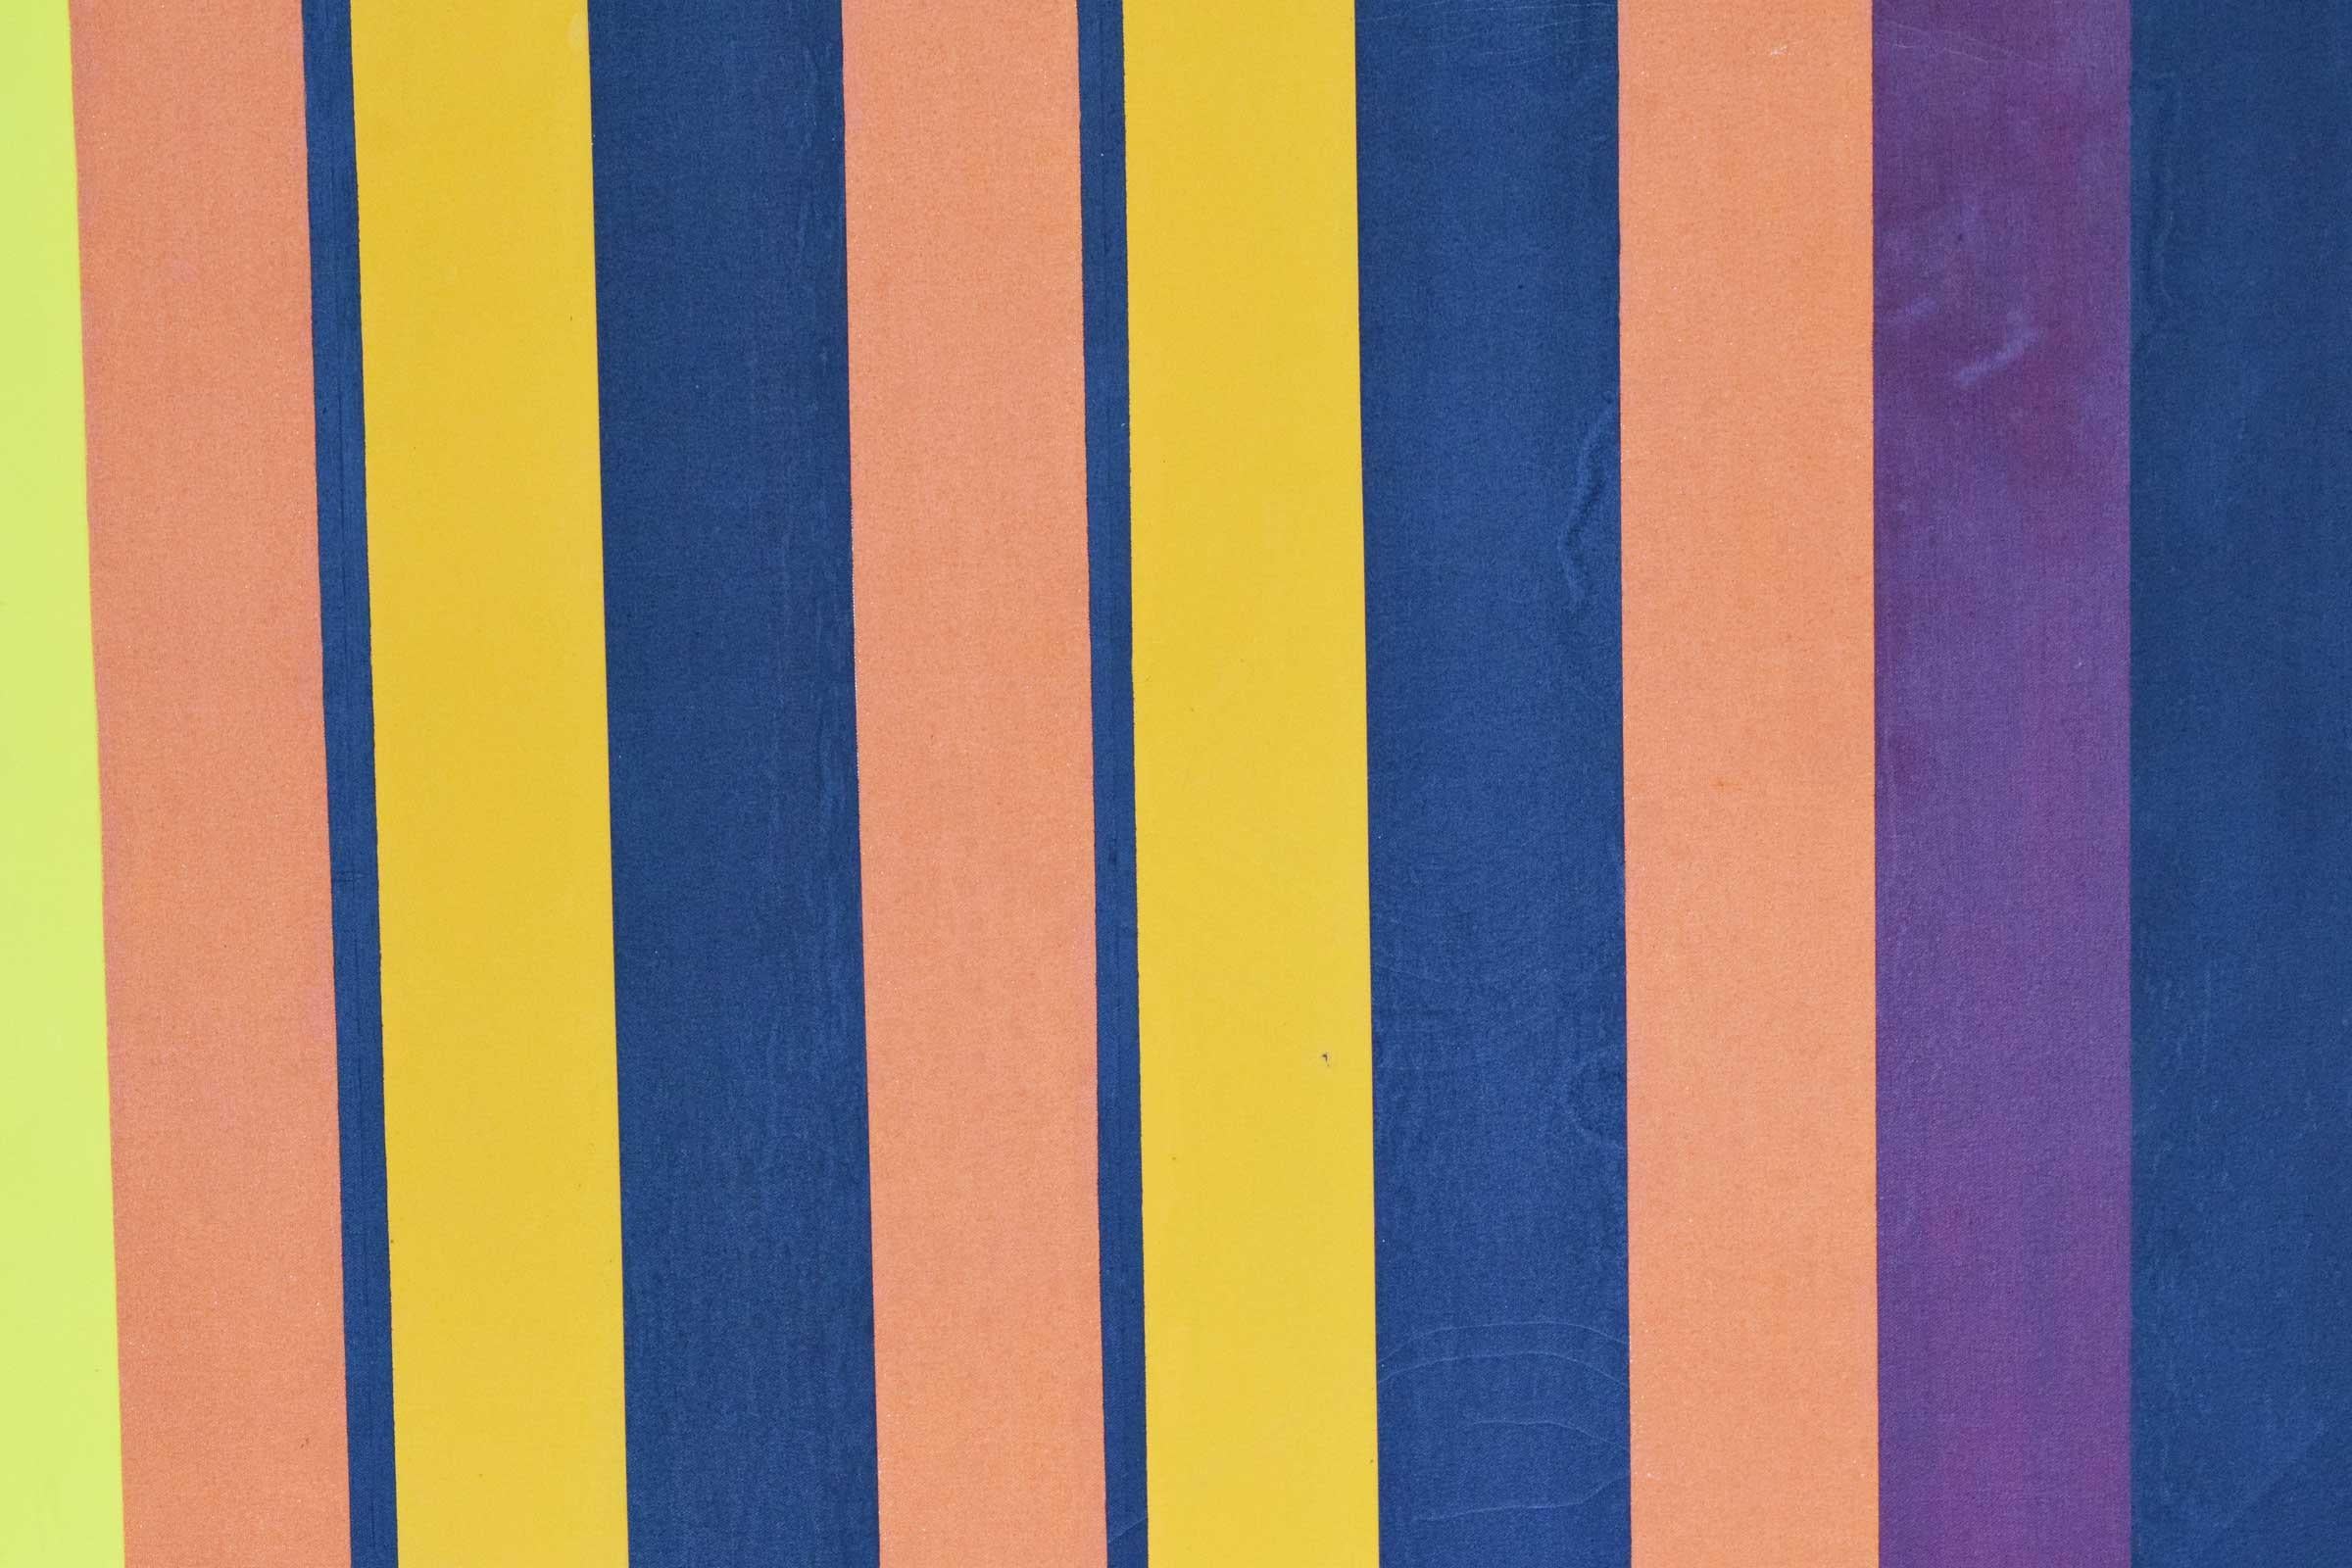 Multicolor vertical stripes abstract geometric modern color field oil painting. The painting (similar to the work of Gene Davis and other Washington Color School artists), was proudly displayed in the living room of a Classic Mid-Century Modern